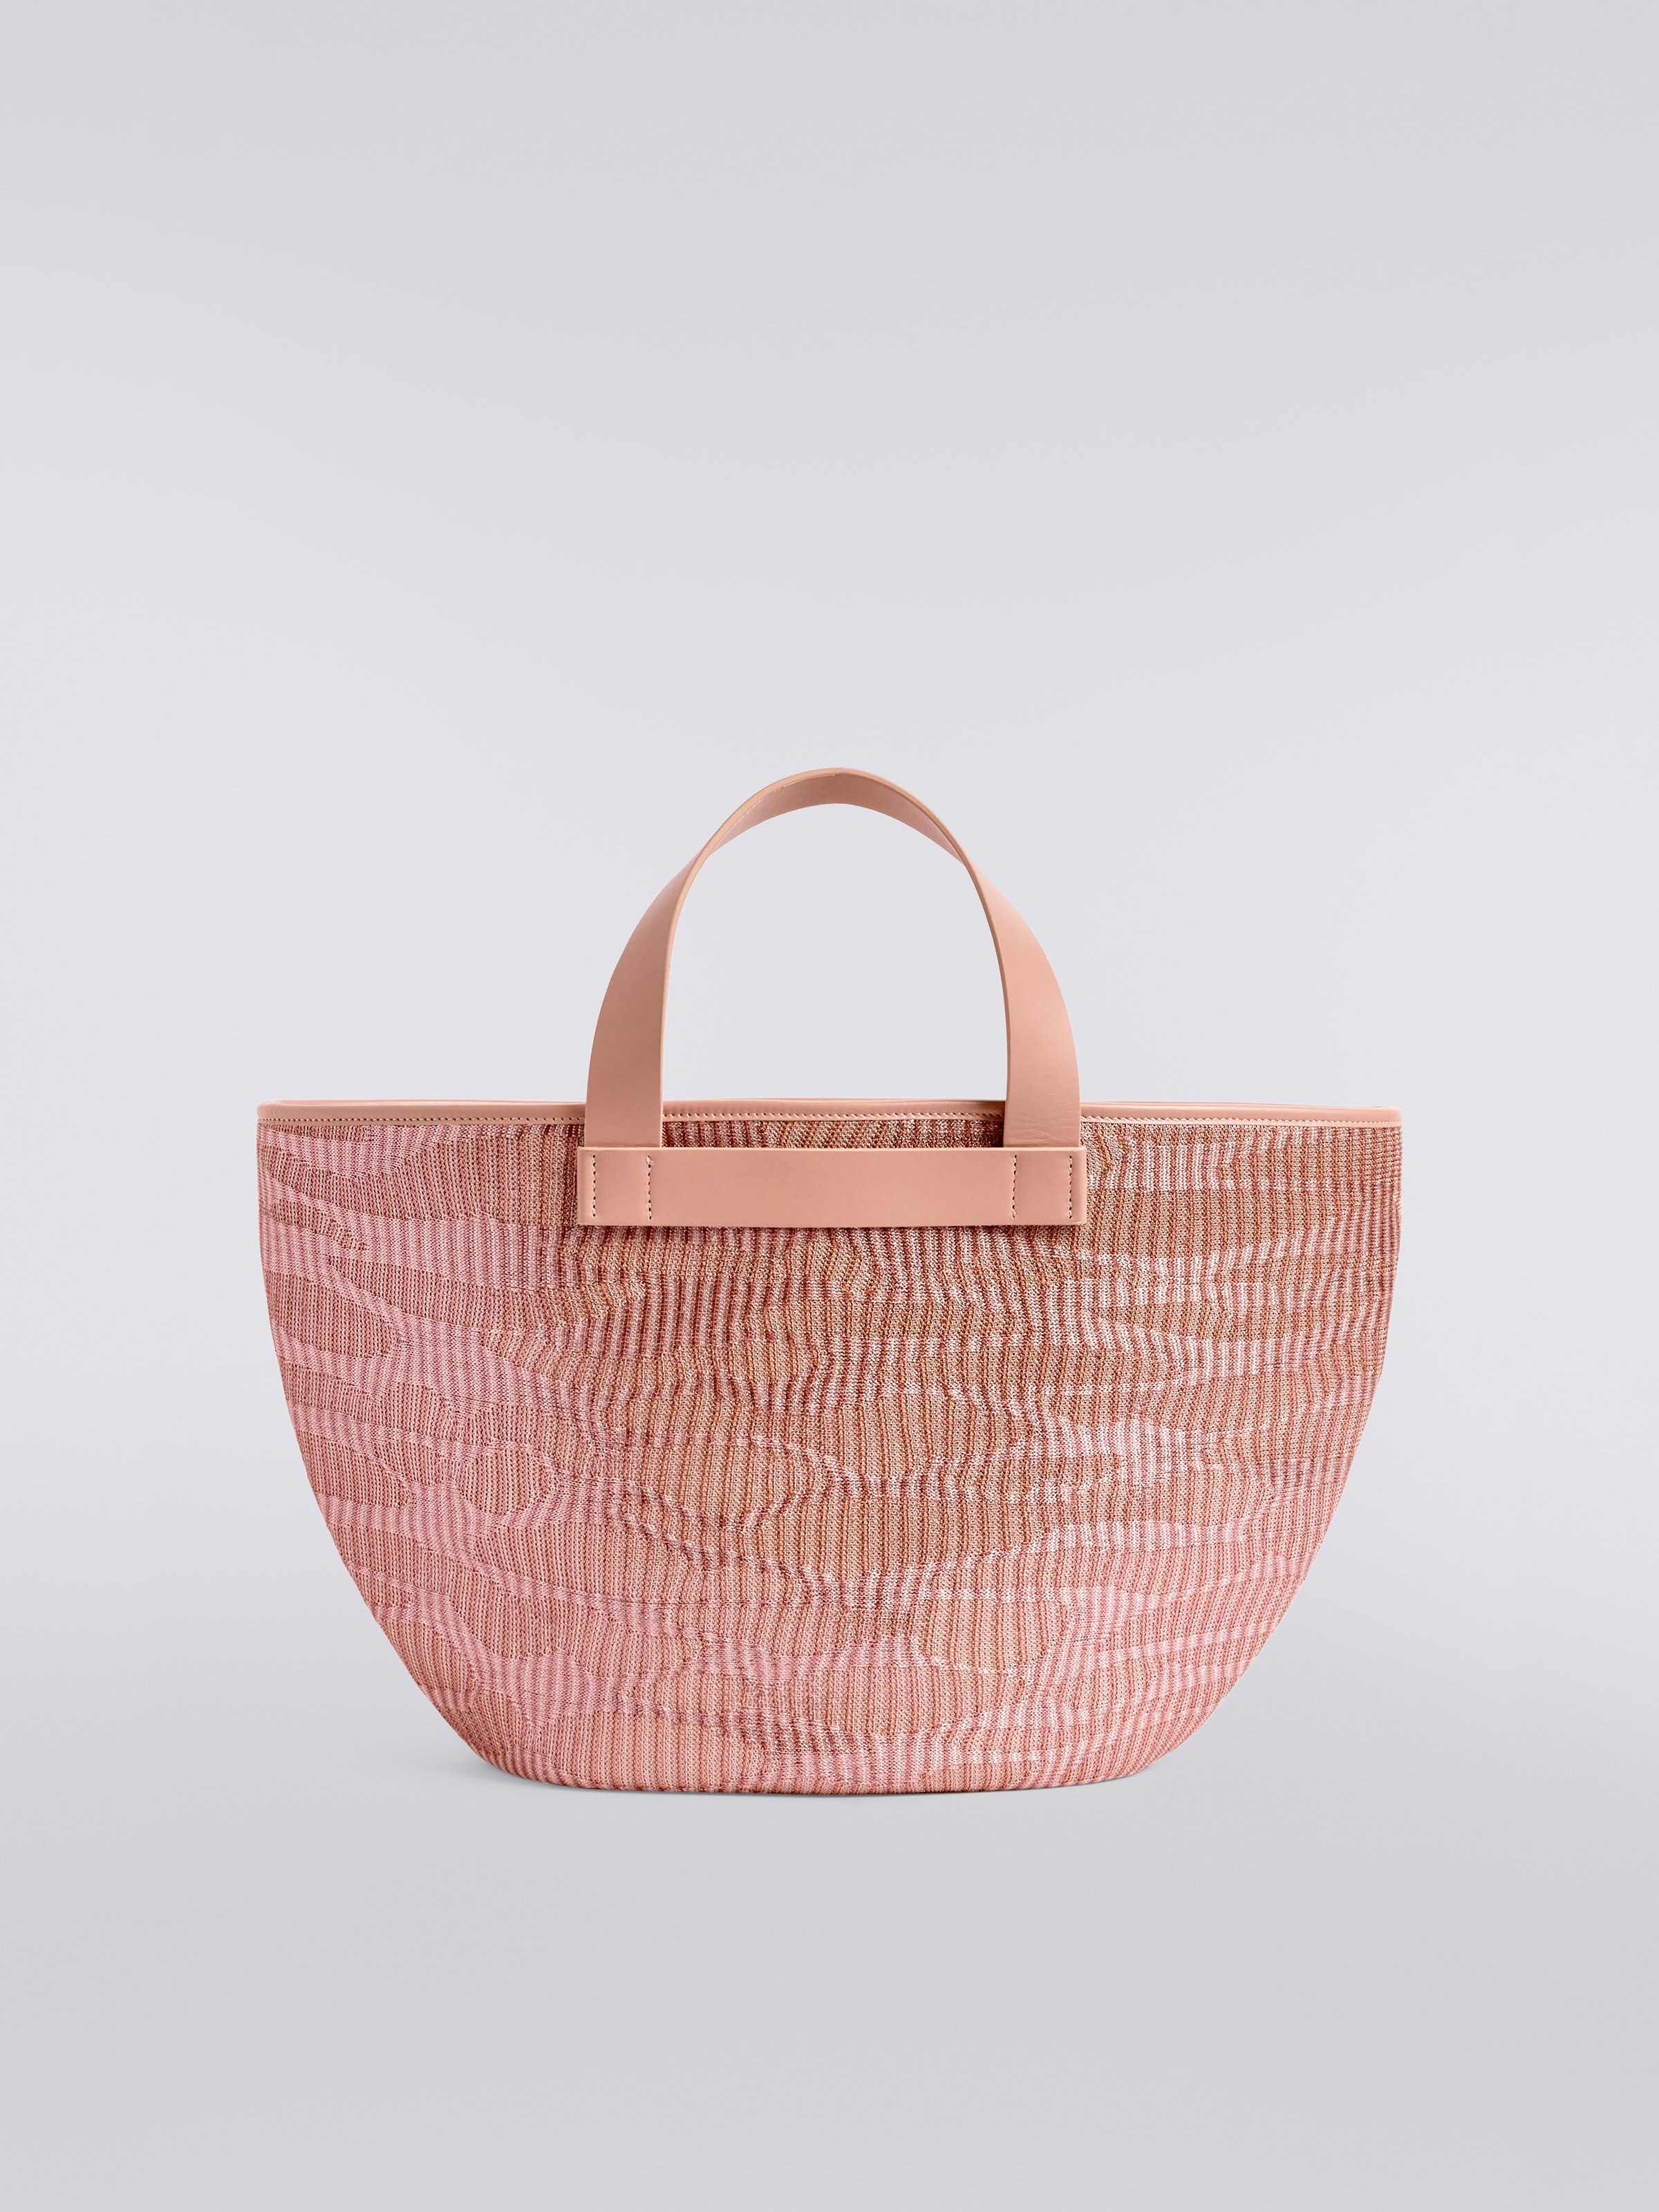 Jacquard viscose knit tote with leather handles, Pink - 2